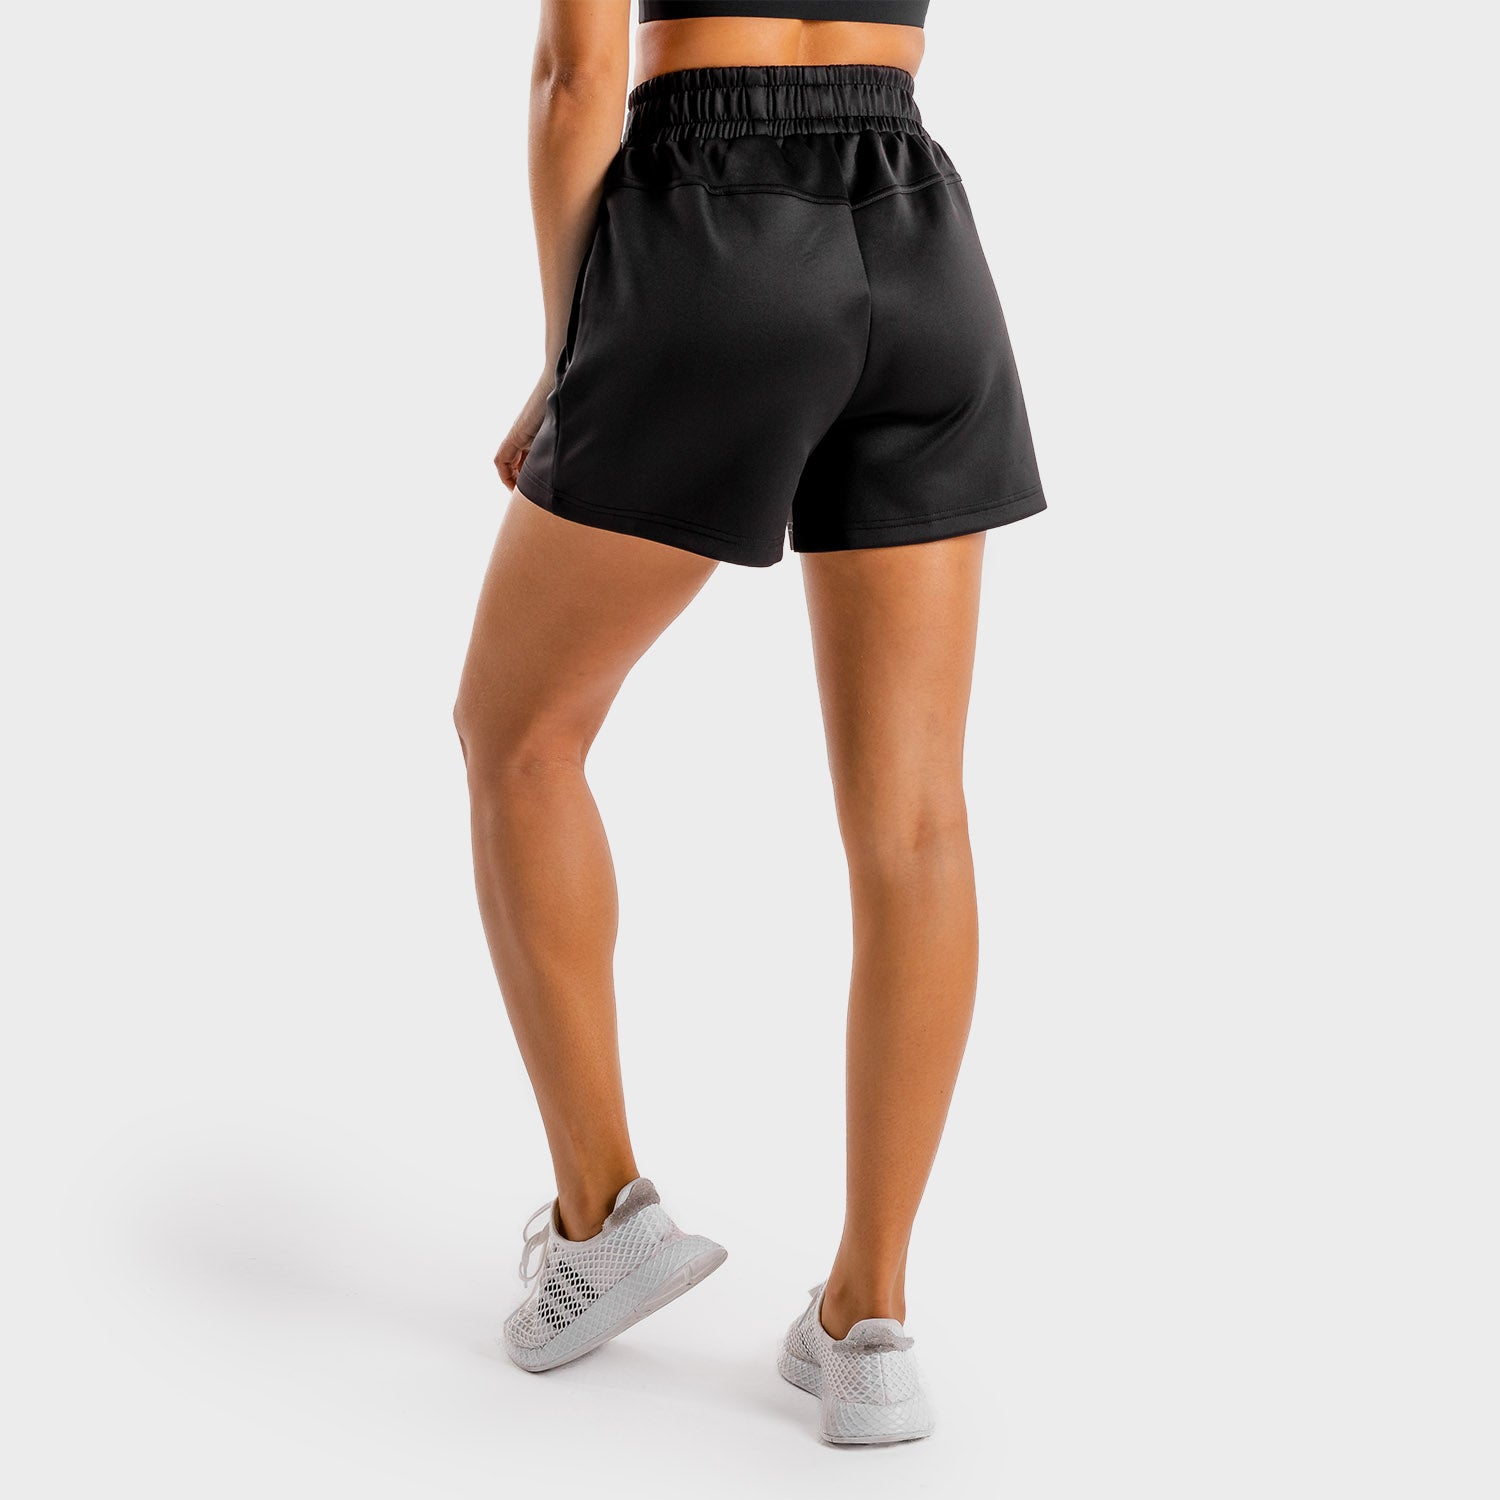 squatwolf-workout-clothes-do-knot-shorts-black-gym-shorts-for-women